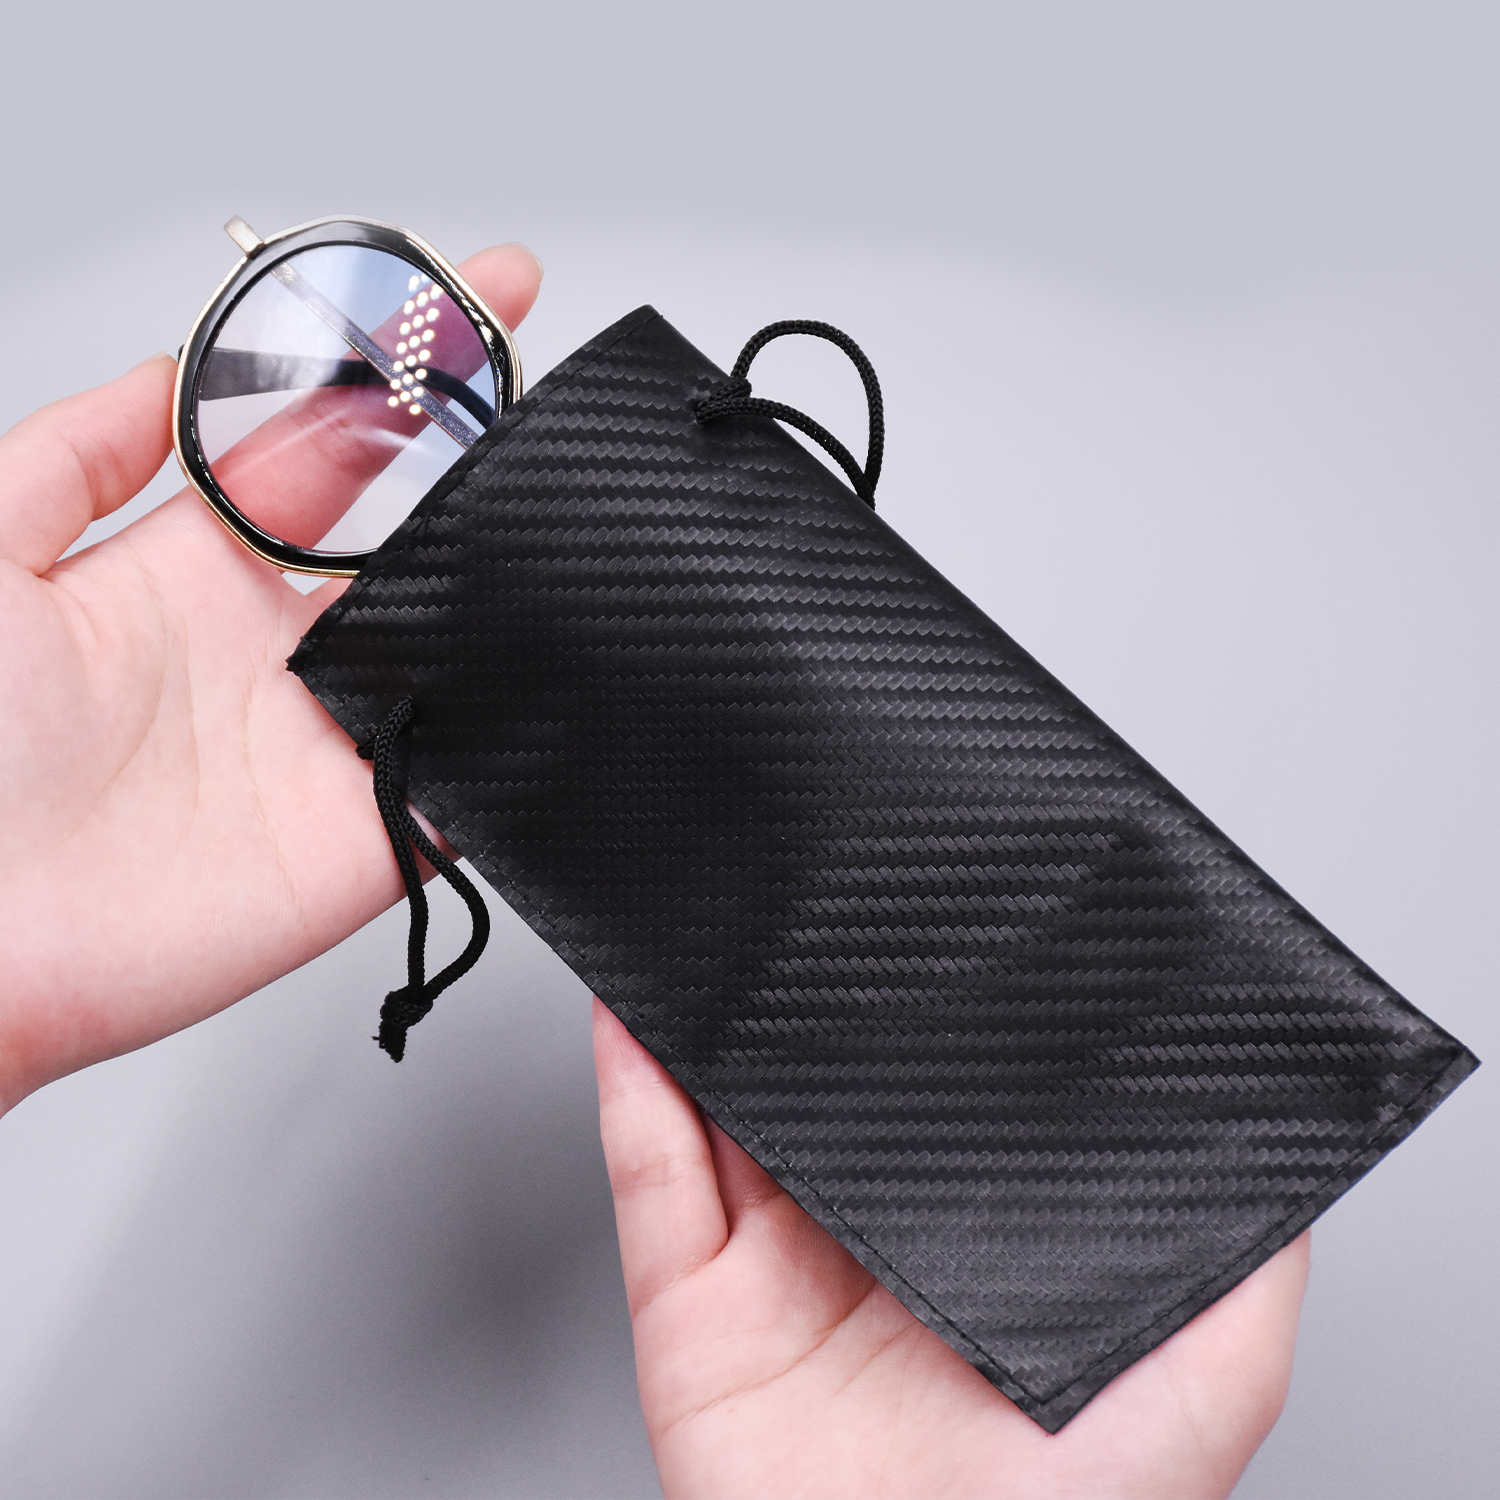 Fashion Striped PU Leather Glasses Bag Lightweight Sunglasses Protective Pouch Case Girls Glasses Case Bag Holder